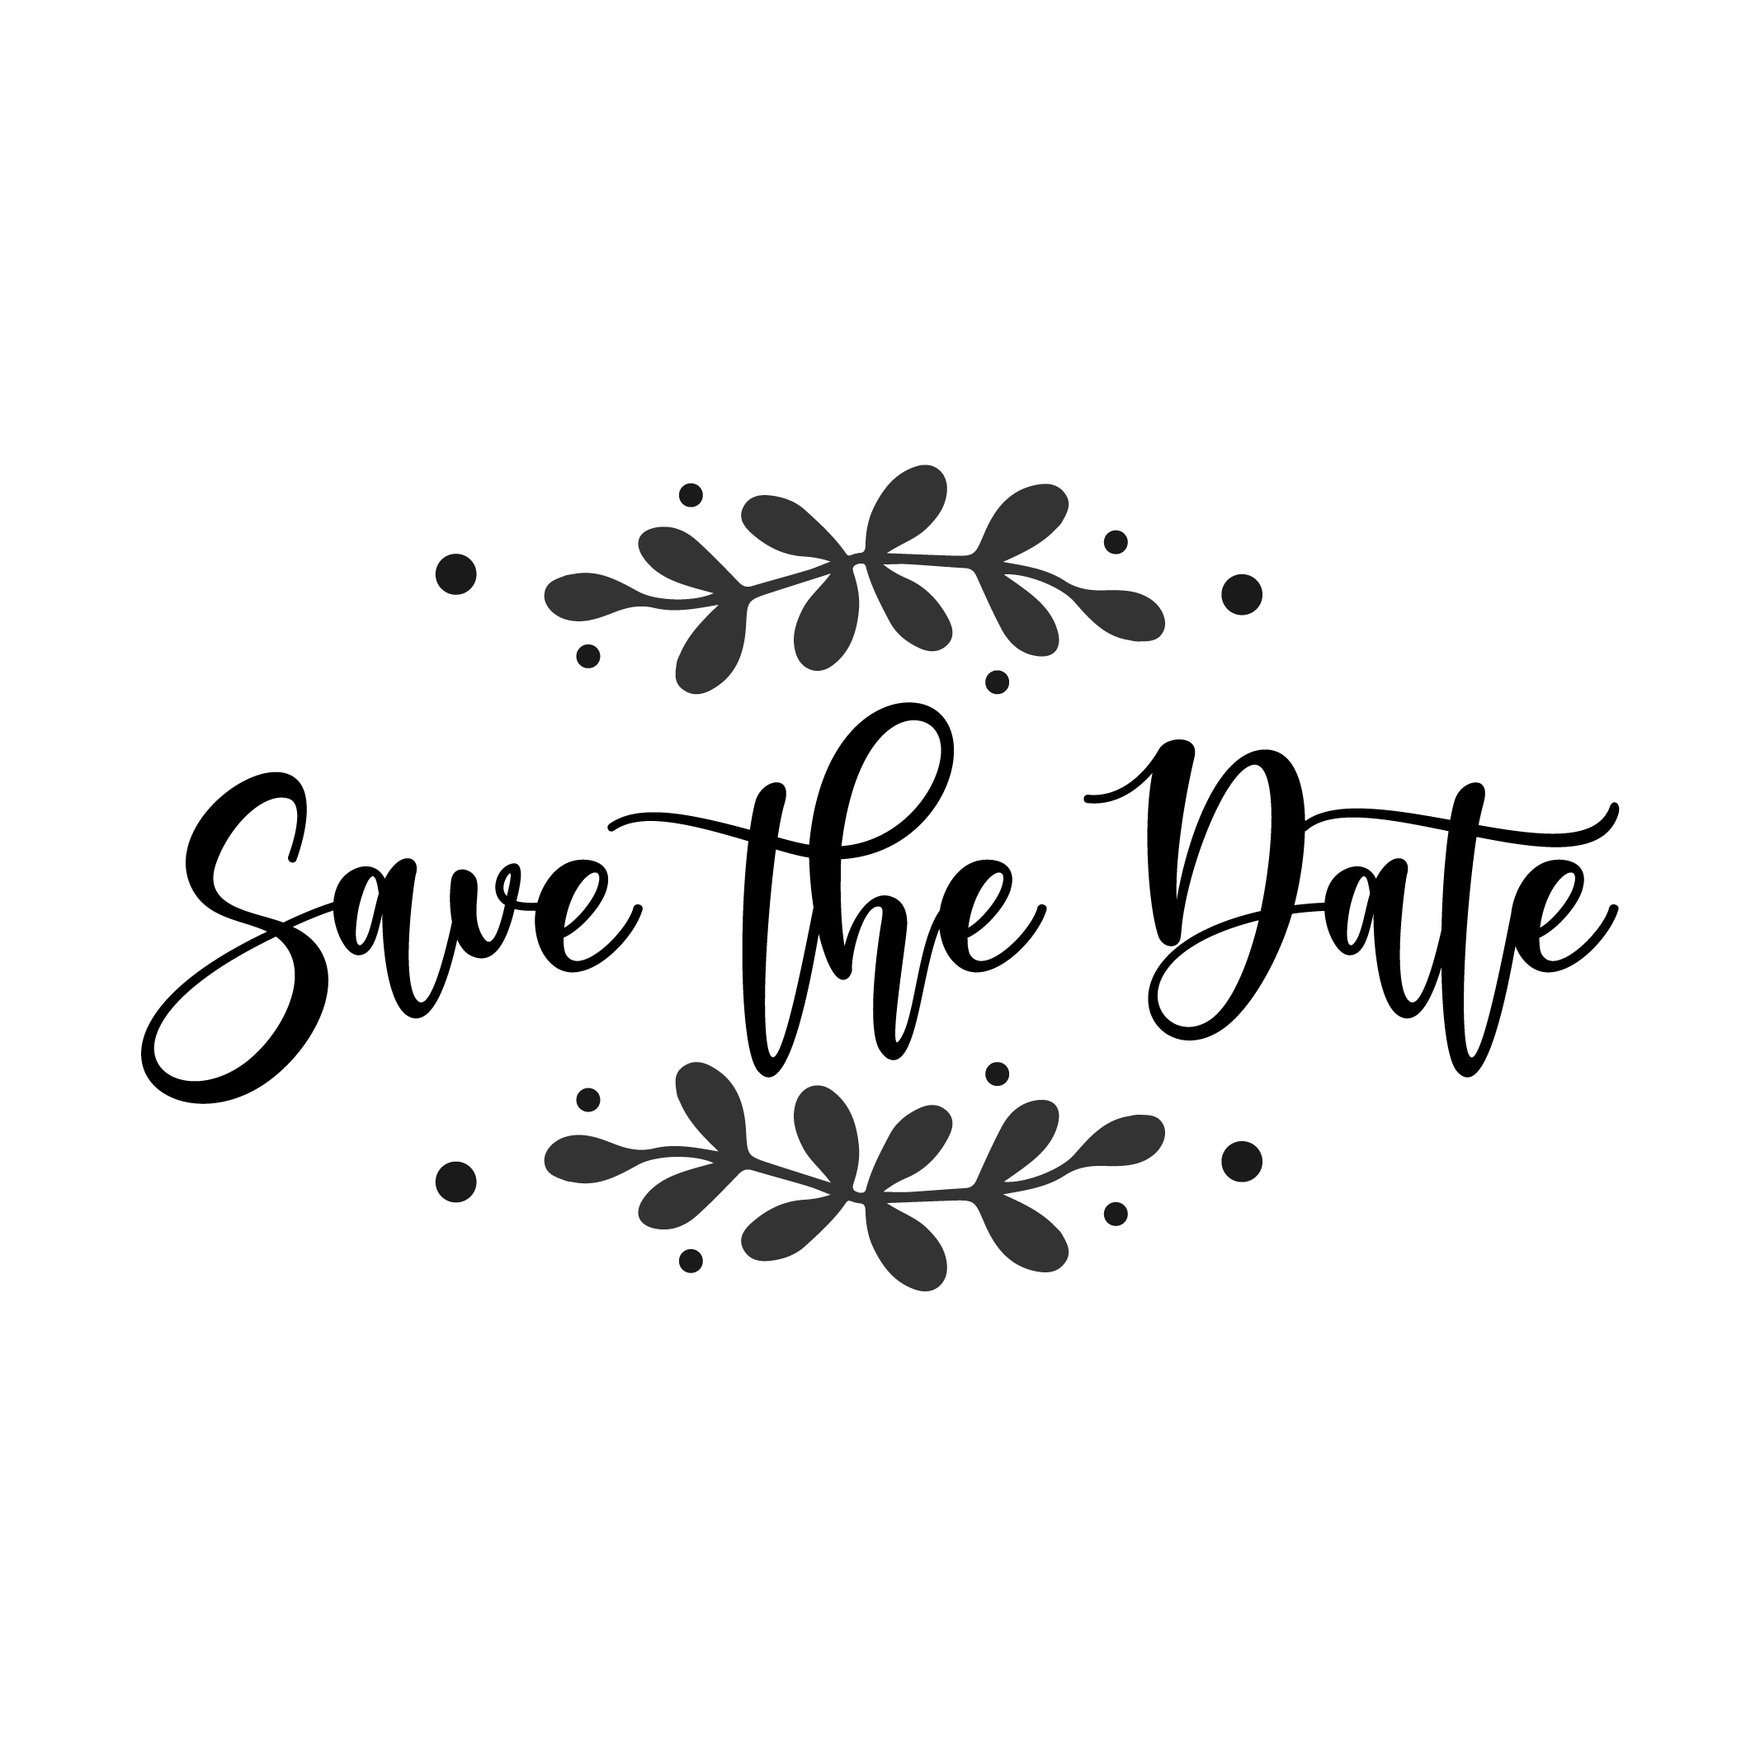 Save The Date Silhouette